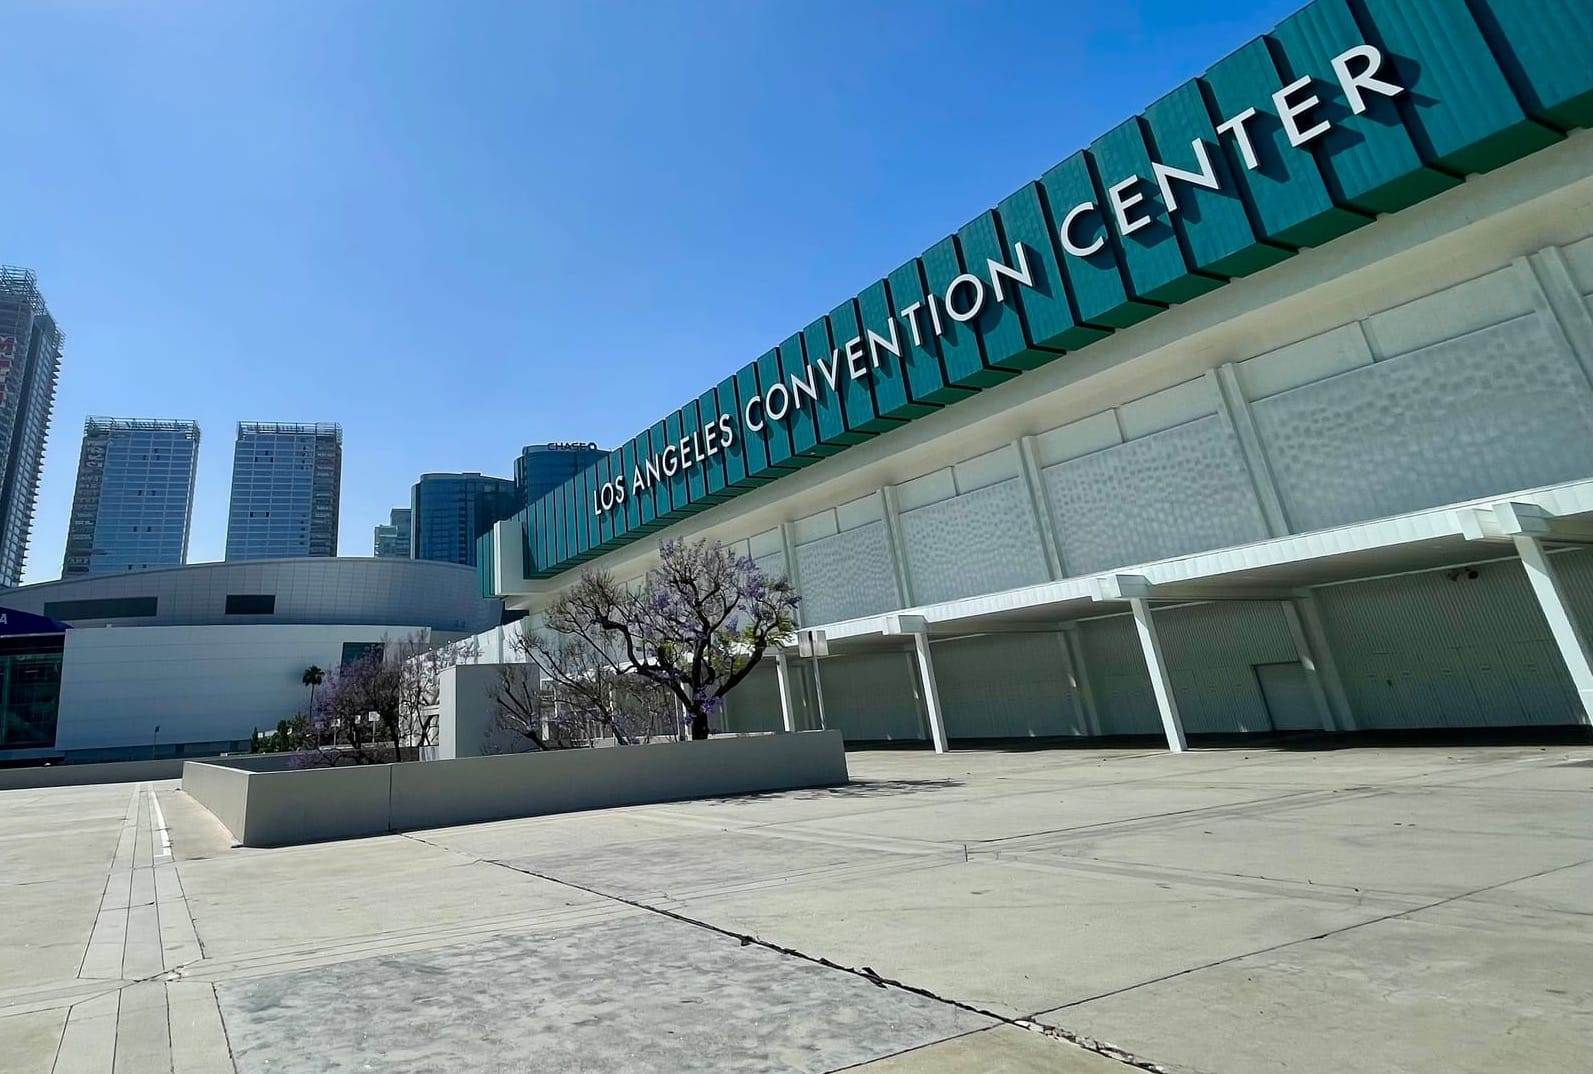 A vacant plaza in front of the oldest convention center building with signage declaring LOS ANGELES CONVENTION CENTER